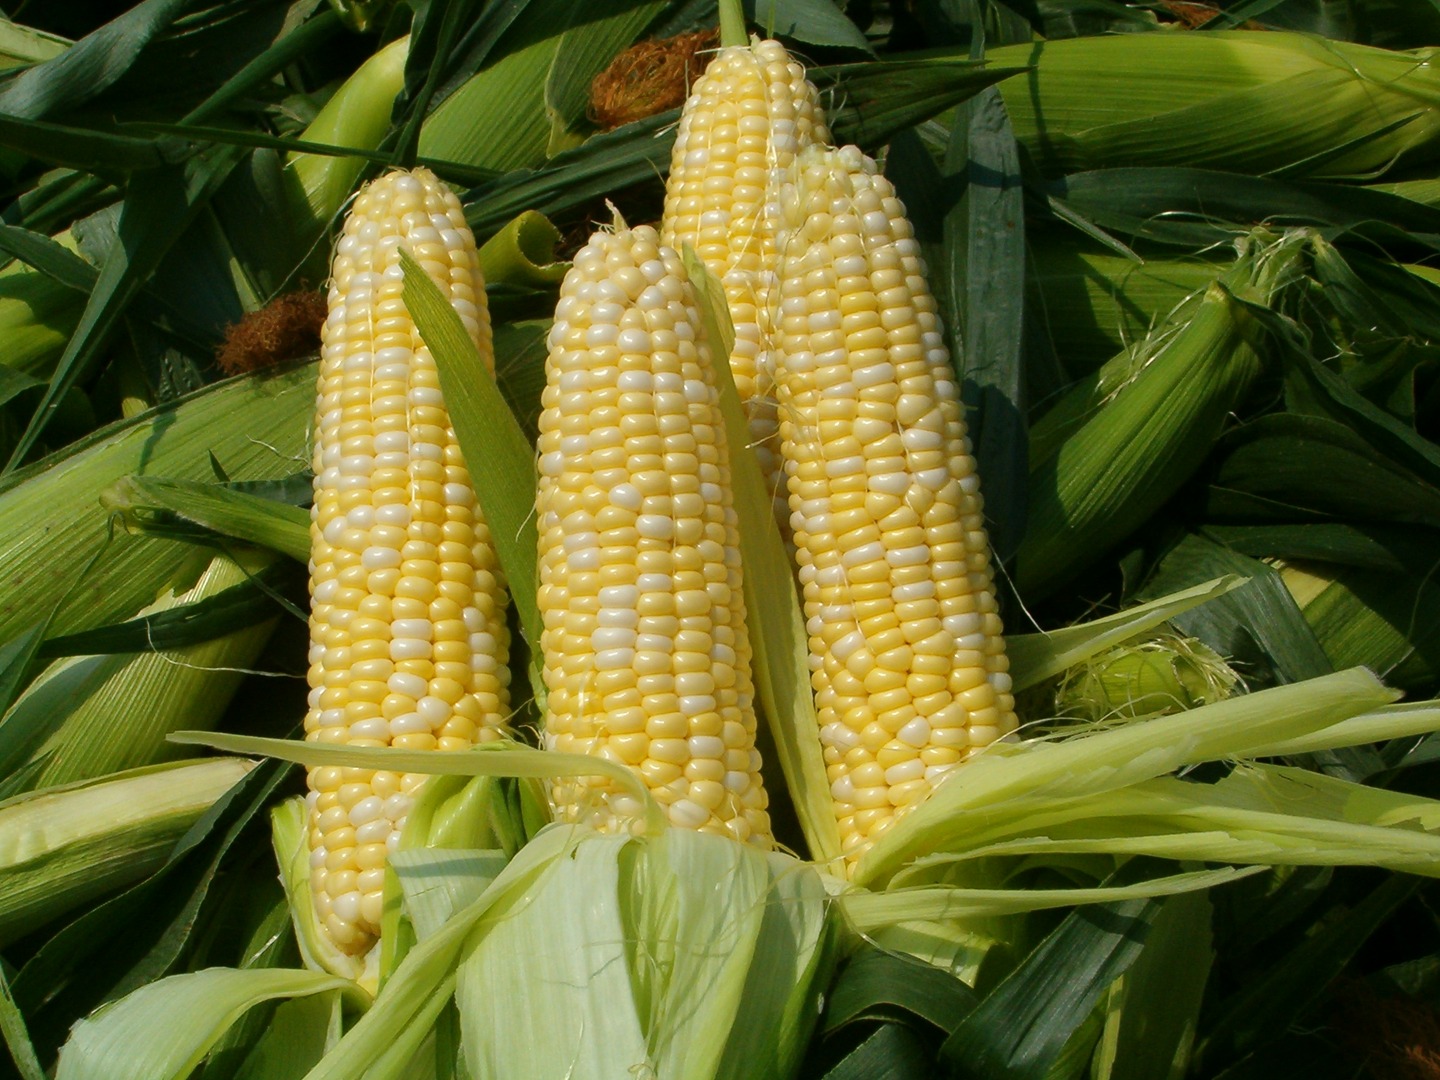 Corn Products